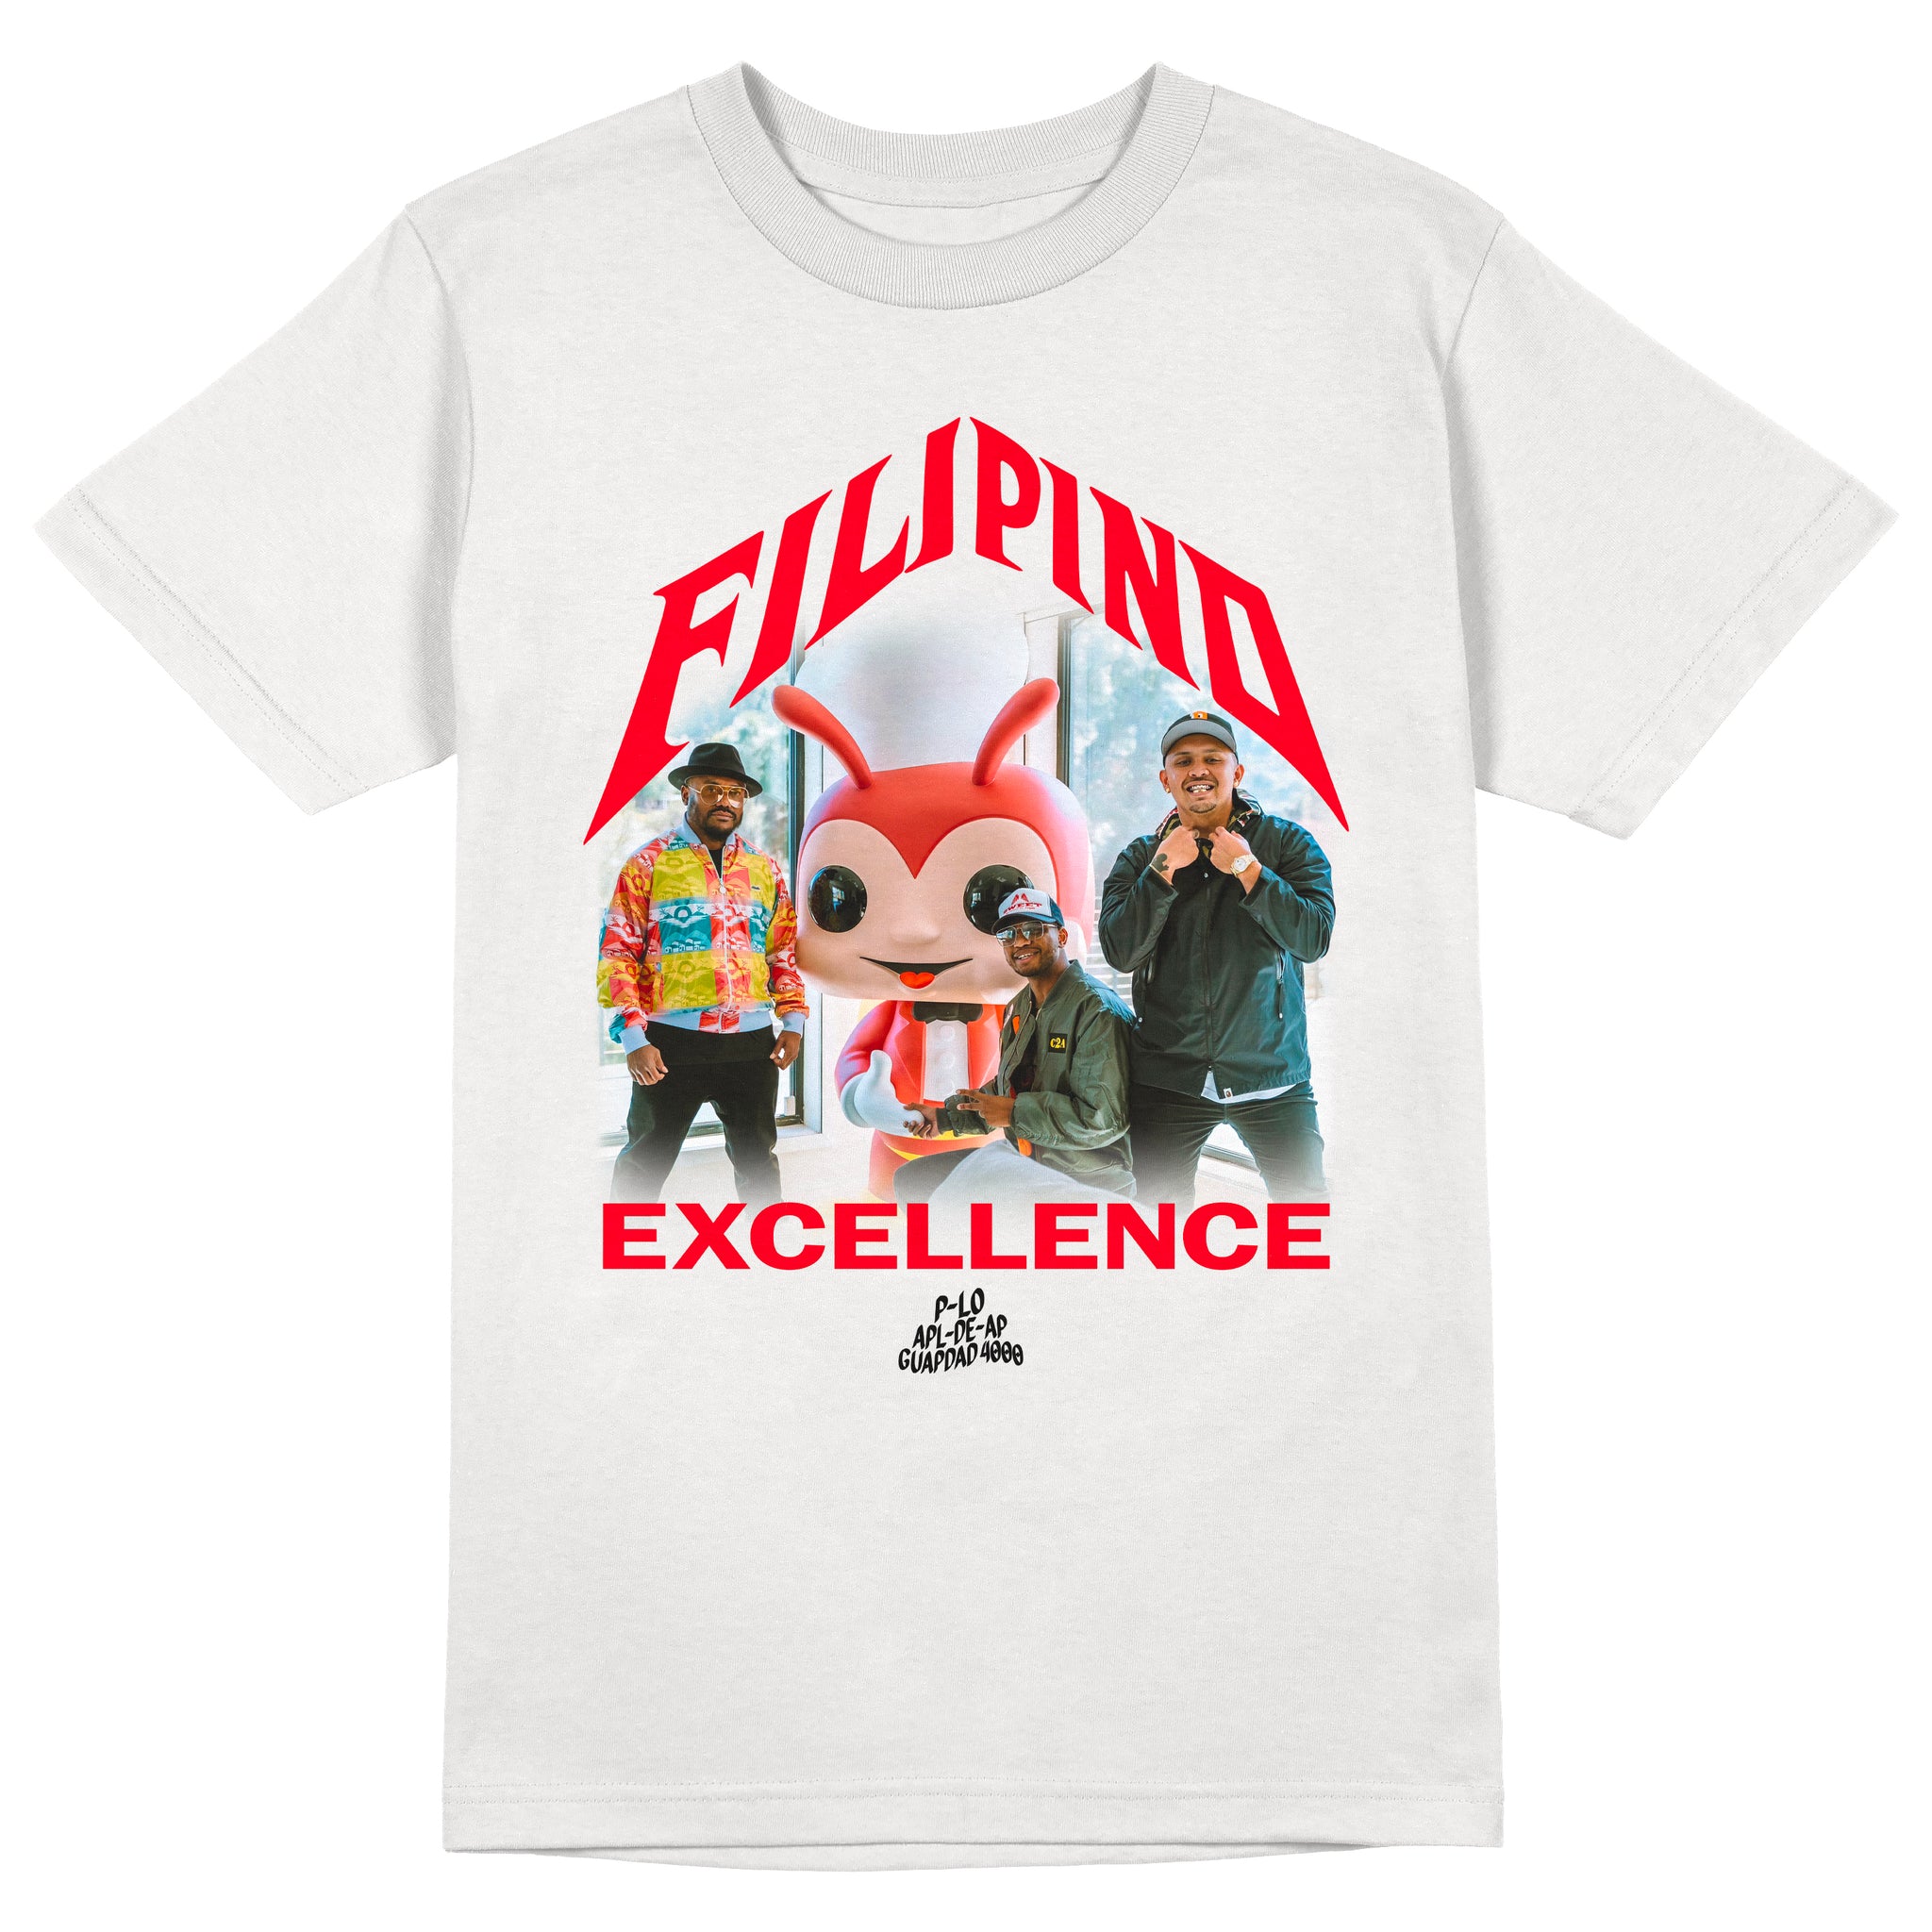 Filipino Excellence